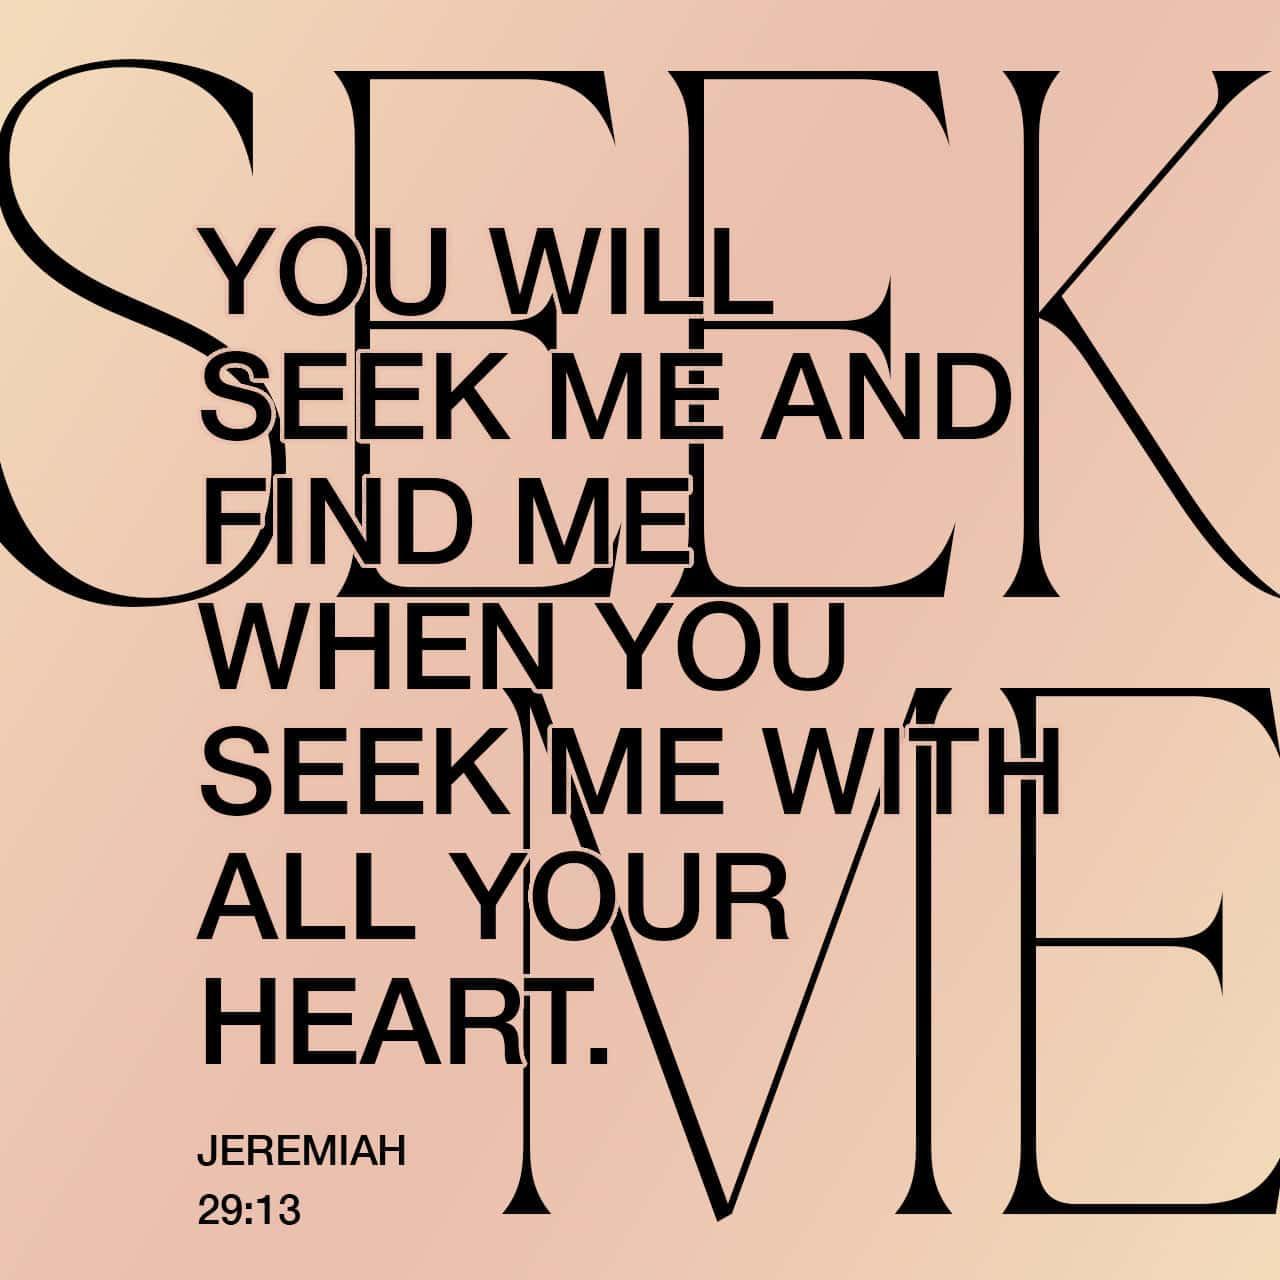 Bible Verse of the Day - day 88 - image 68508 (Jeremiah 29:13)